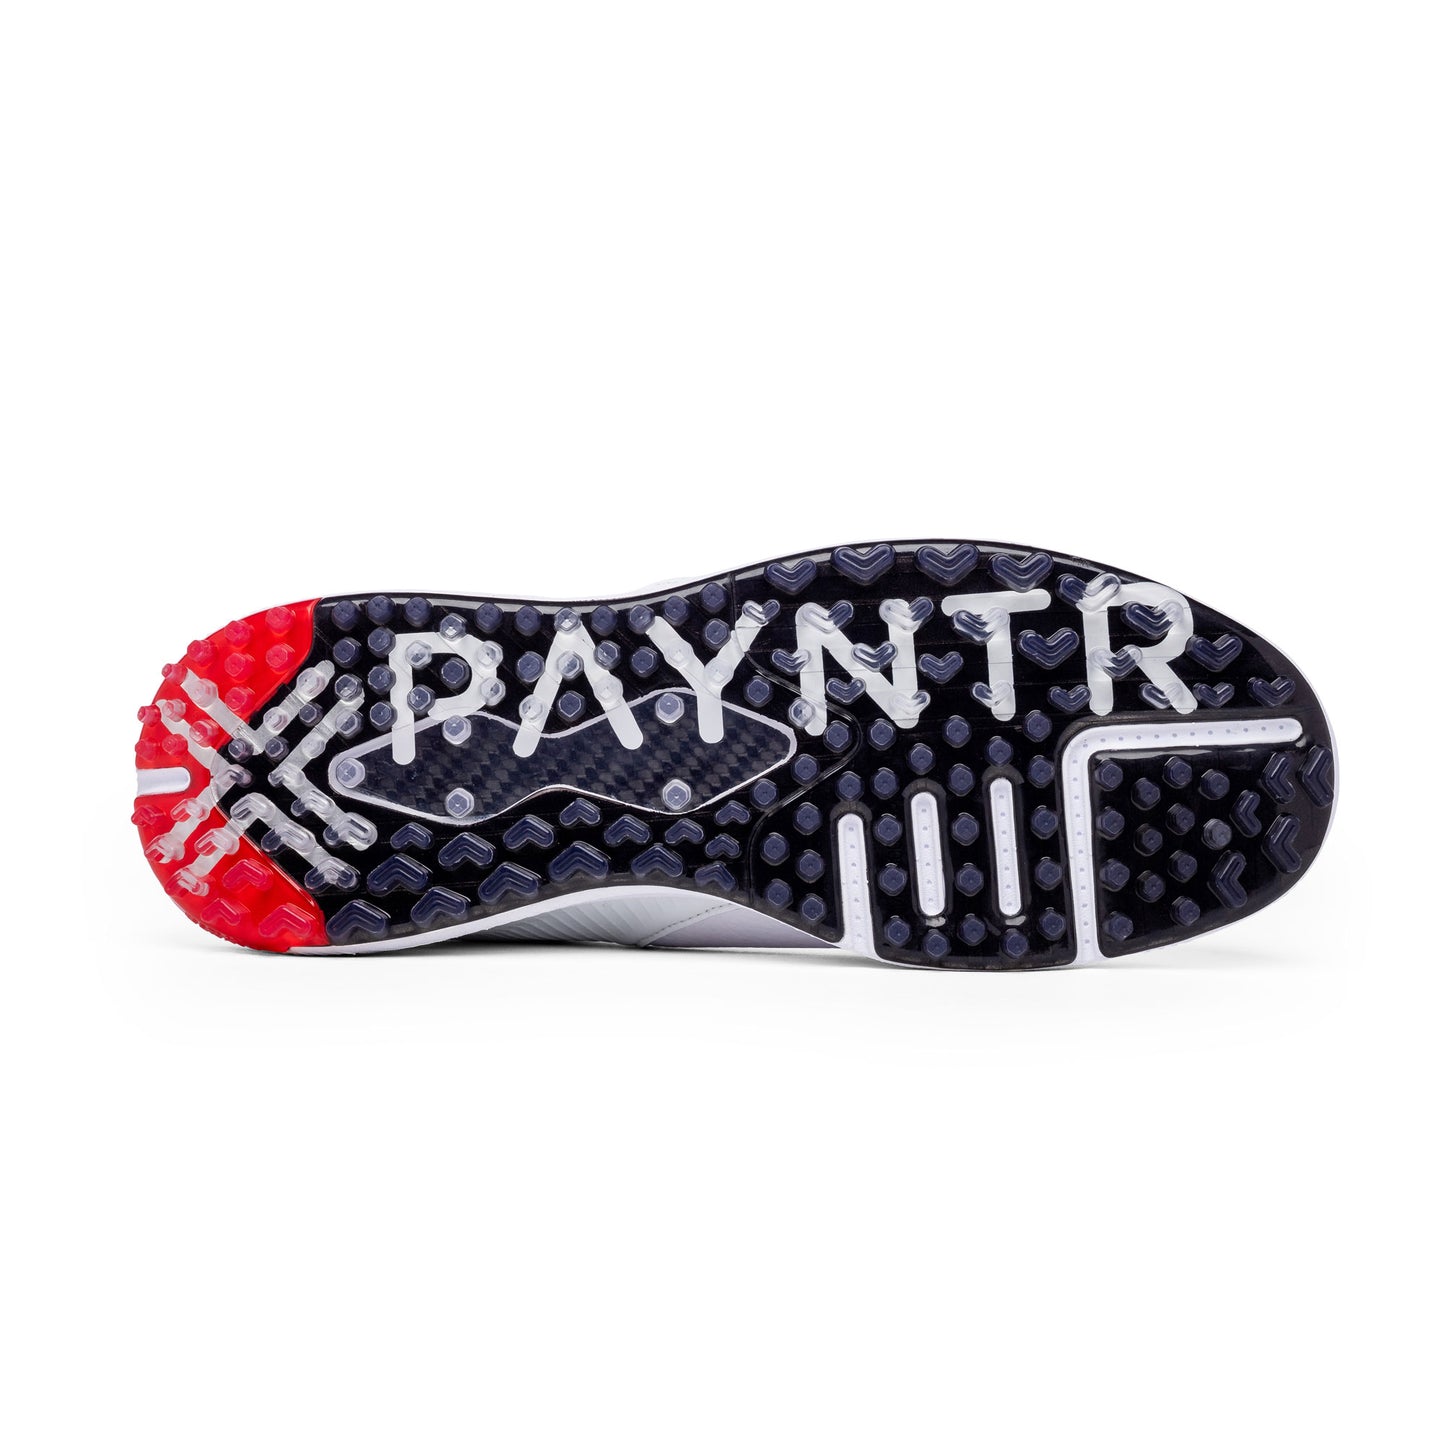 PAYNTR X-002 LE Spikeless Golf Shoe (White) - Sole